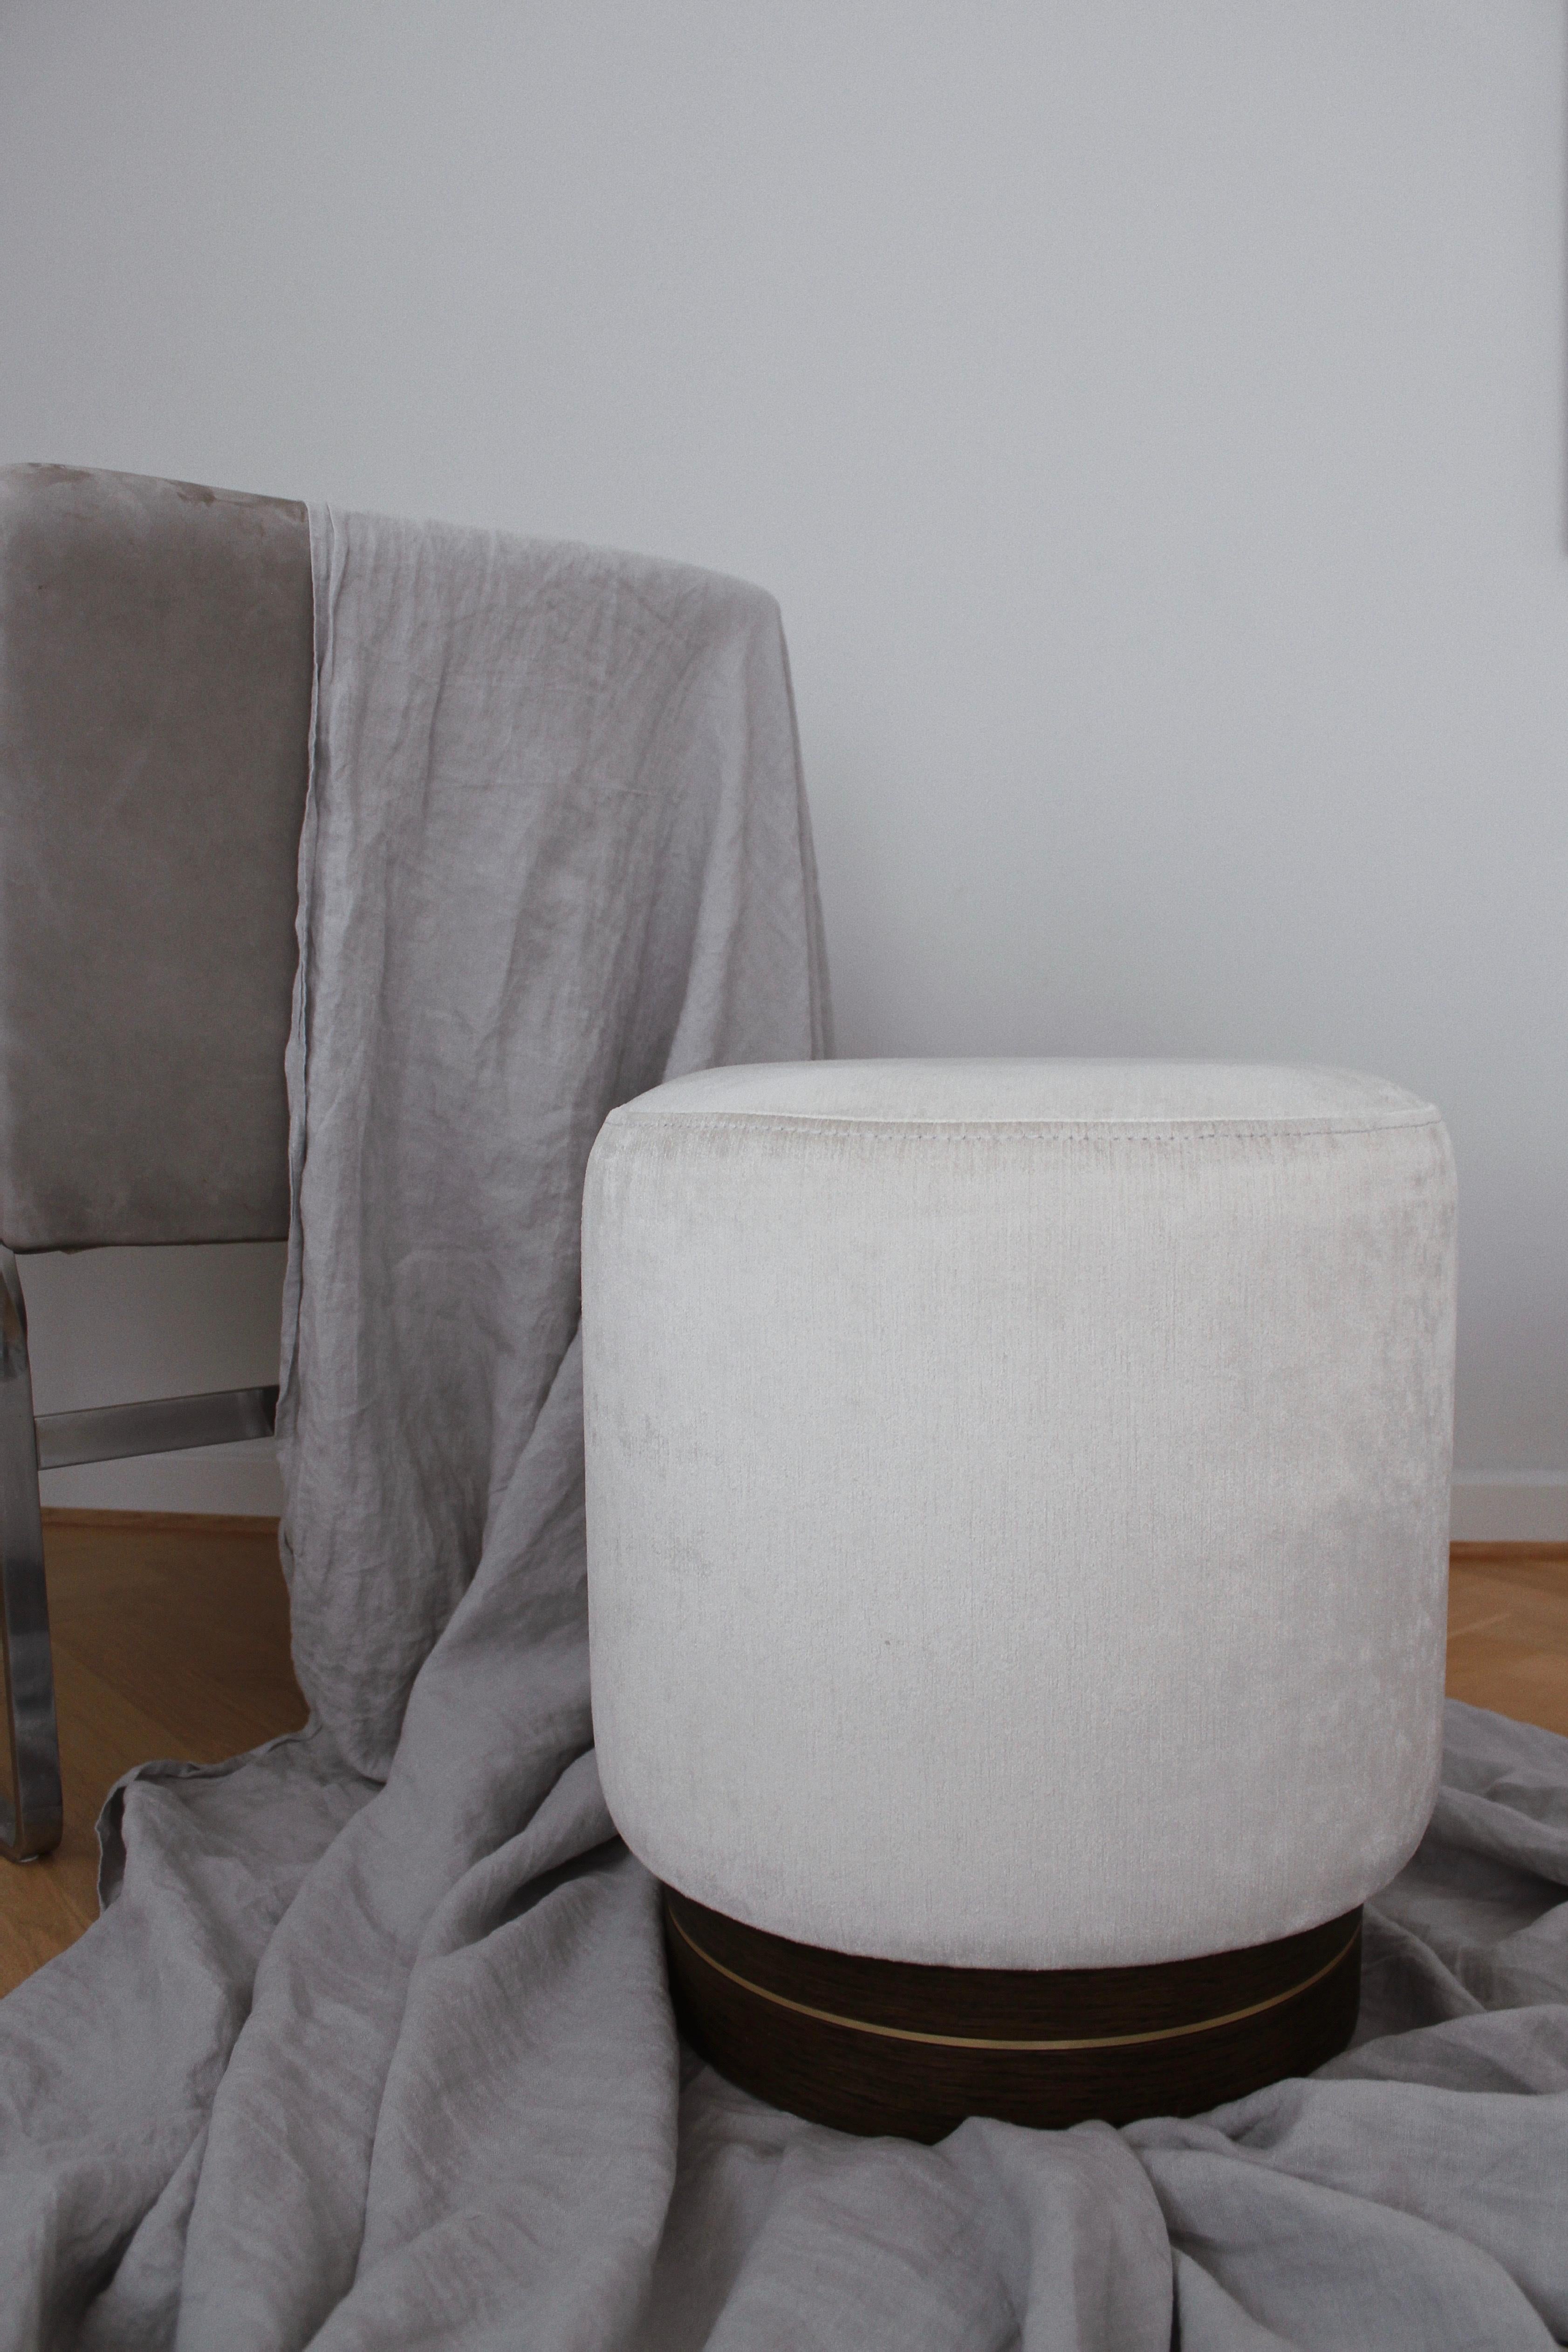 Modest in design yet solid in form, the handmade La Sorellina pouf is a modern interpretation of the classic pouf. With its sculptural presence and soft textures, the pouf combines art and functionality. The use of natural materials of high quality